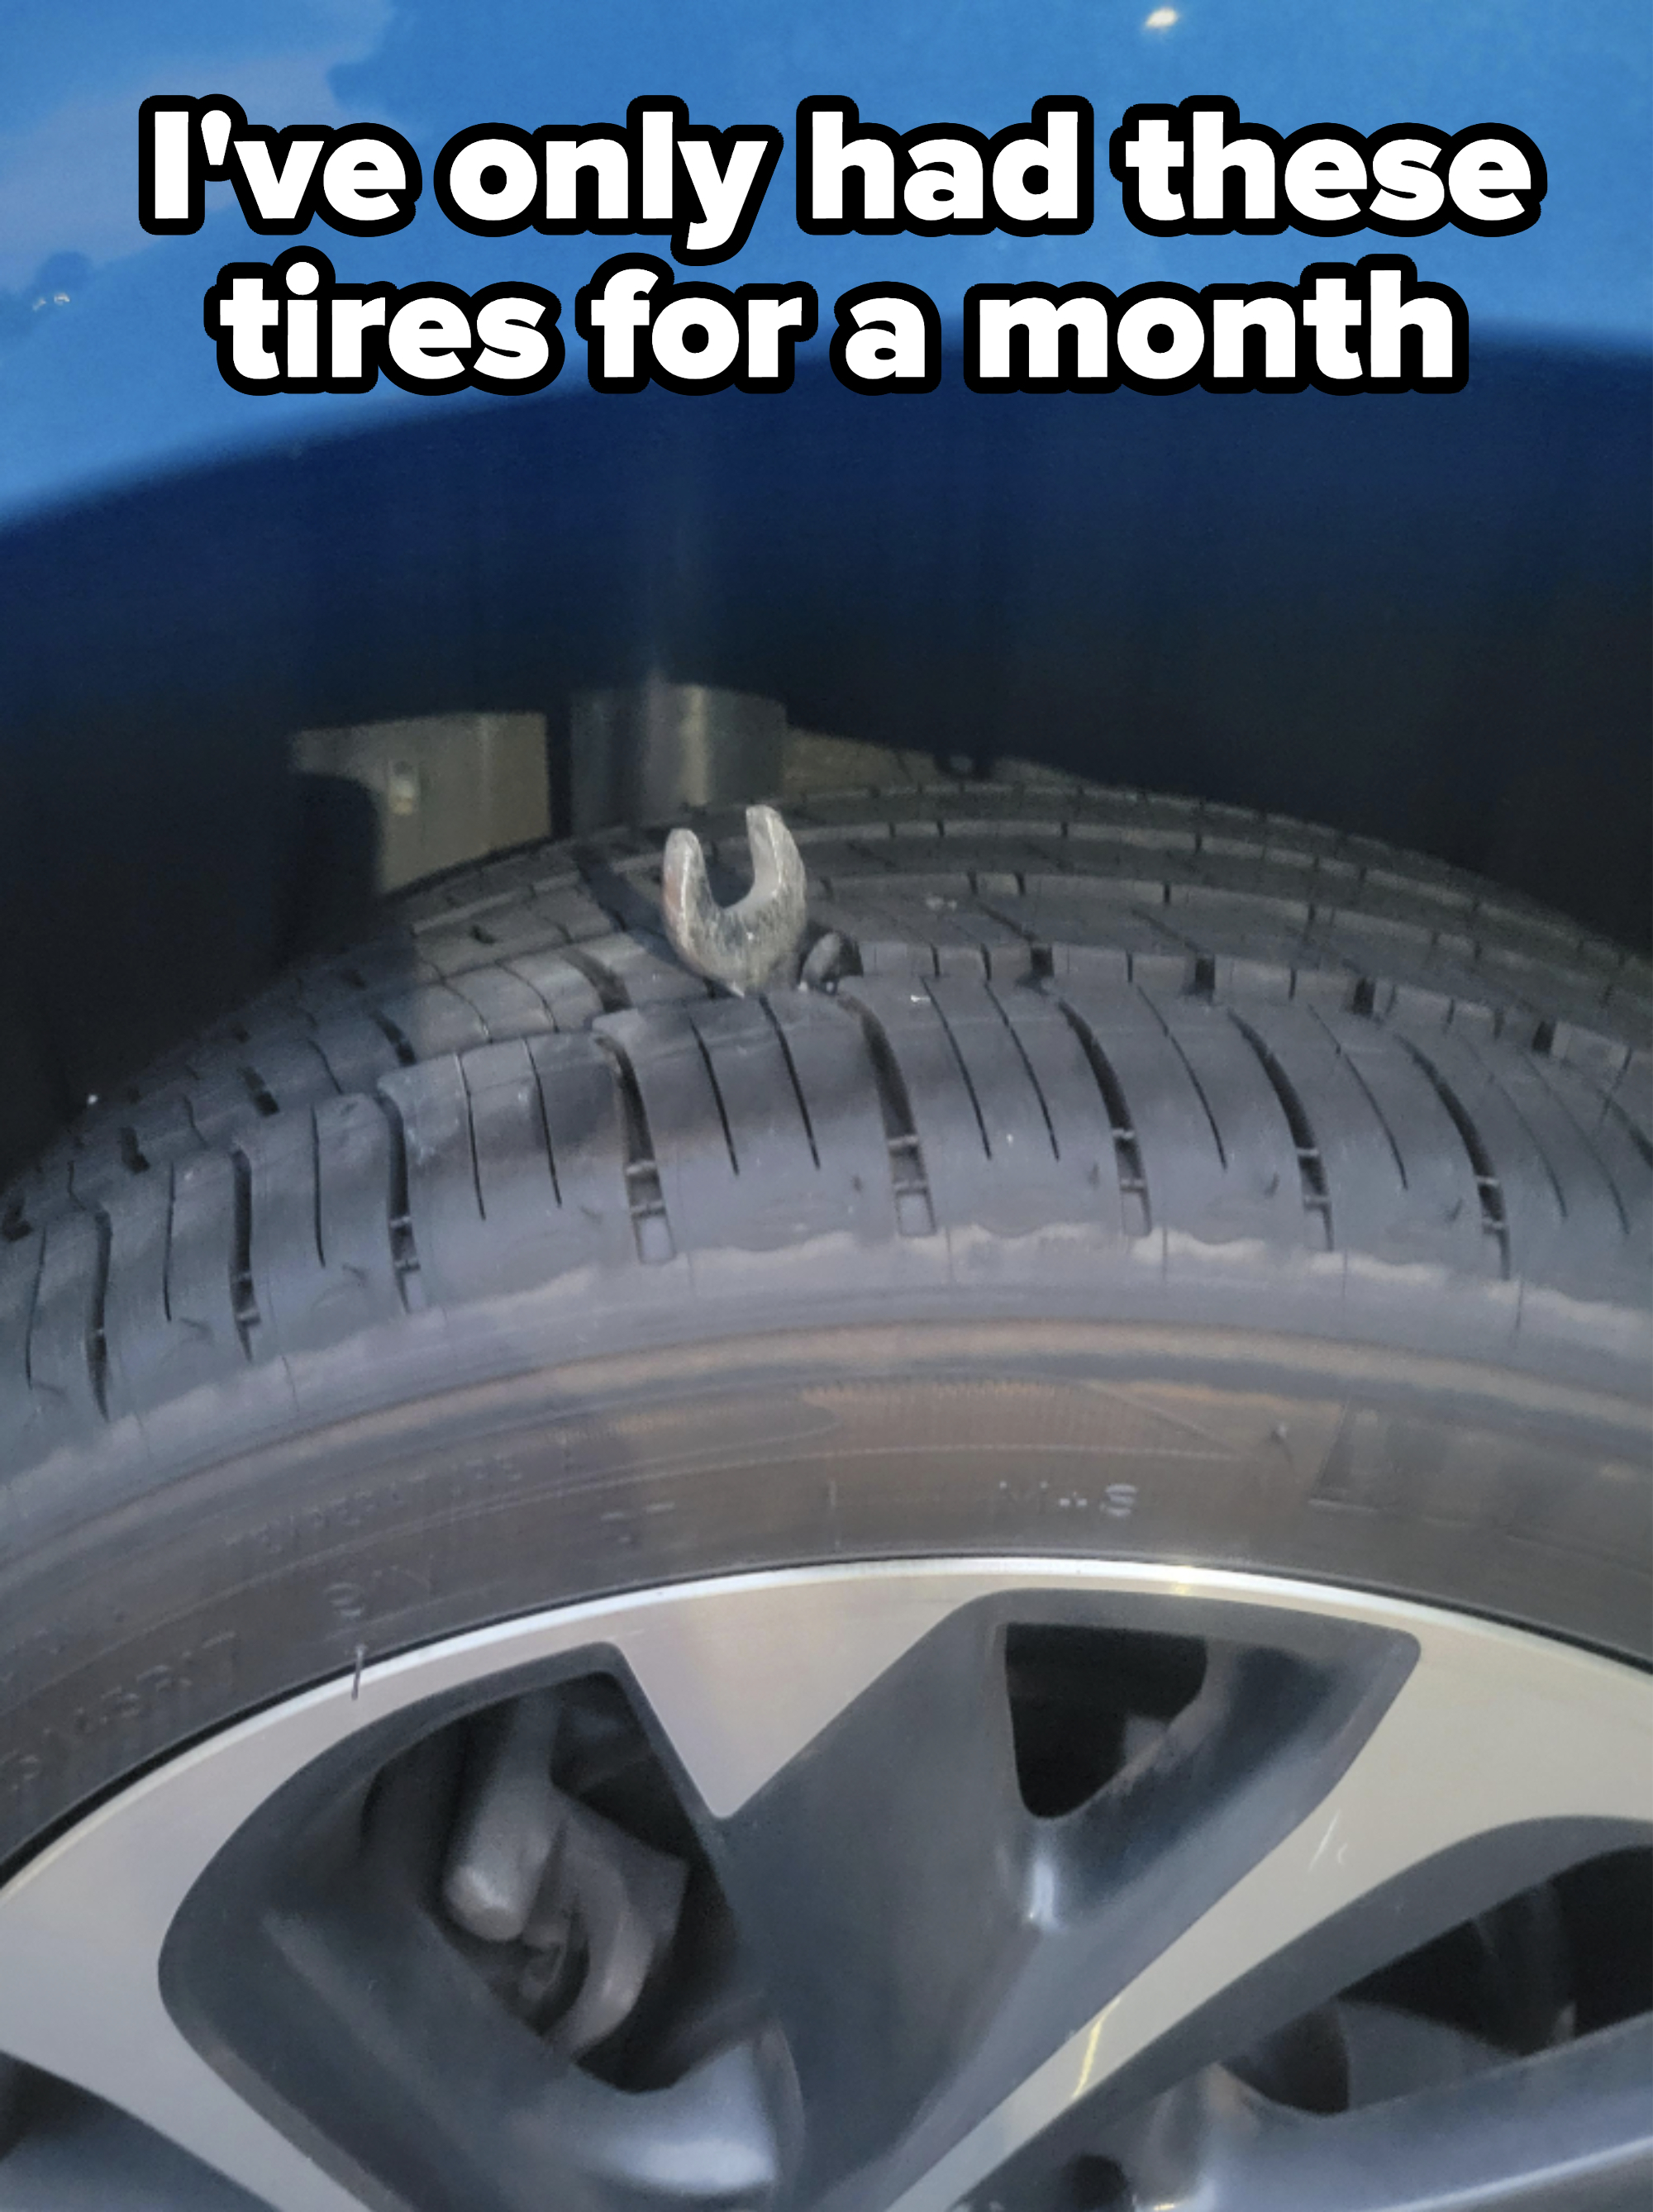 A wrench stuck in a tire